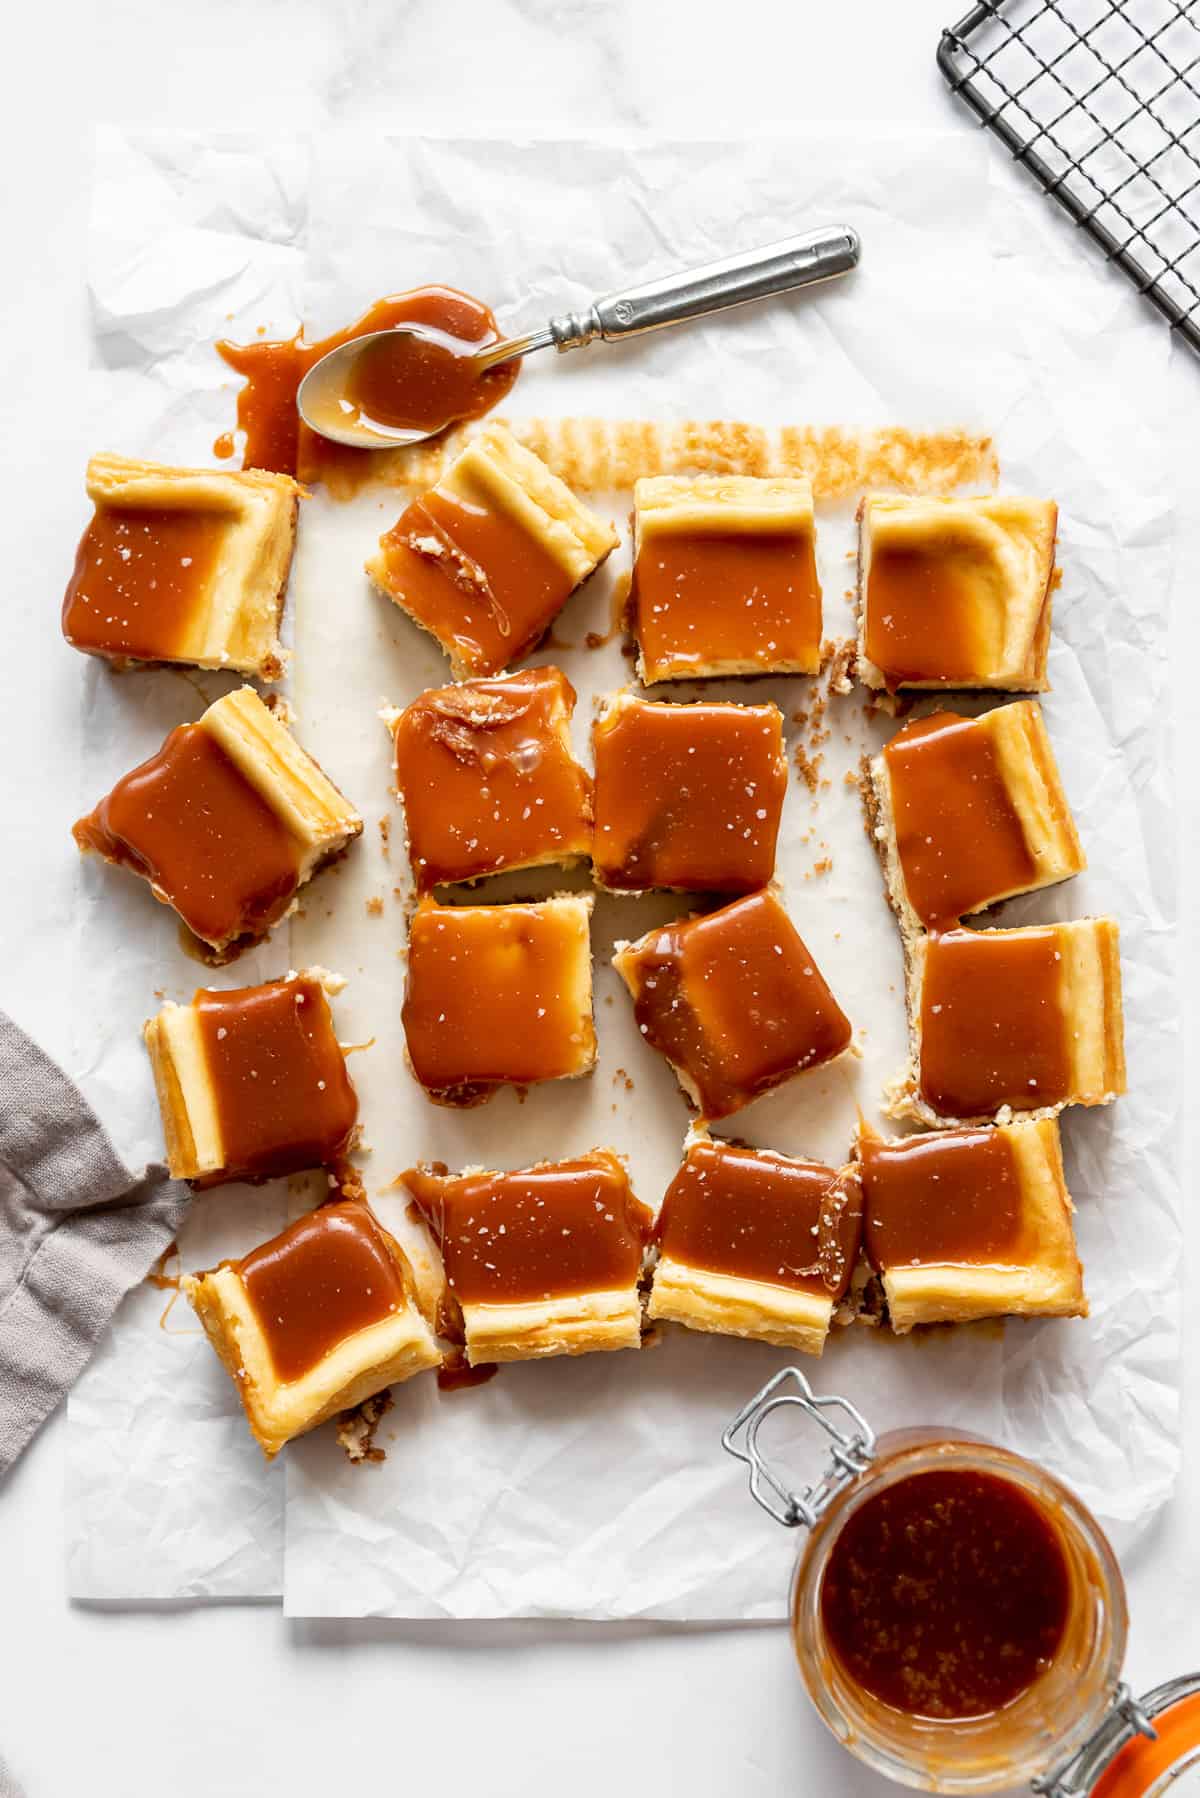 squares of cheesecake covered in salted caramel on white parchment paper next to a jar of homemade caramel sauce.